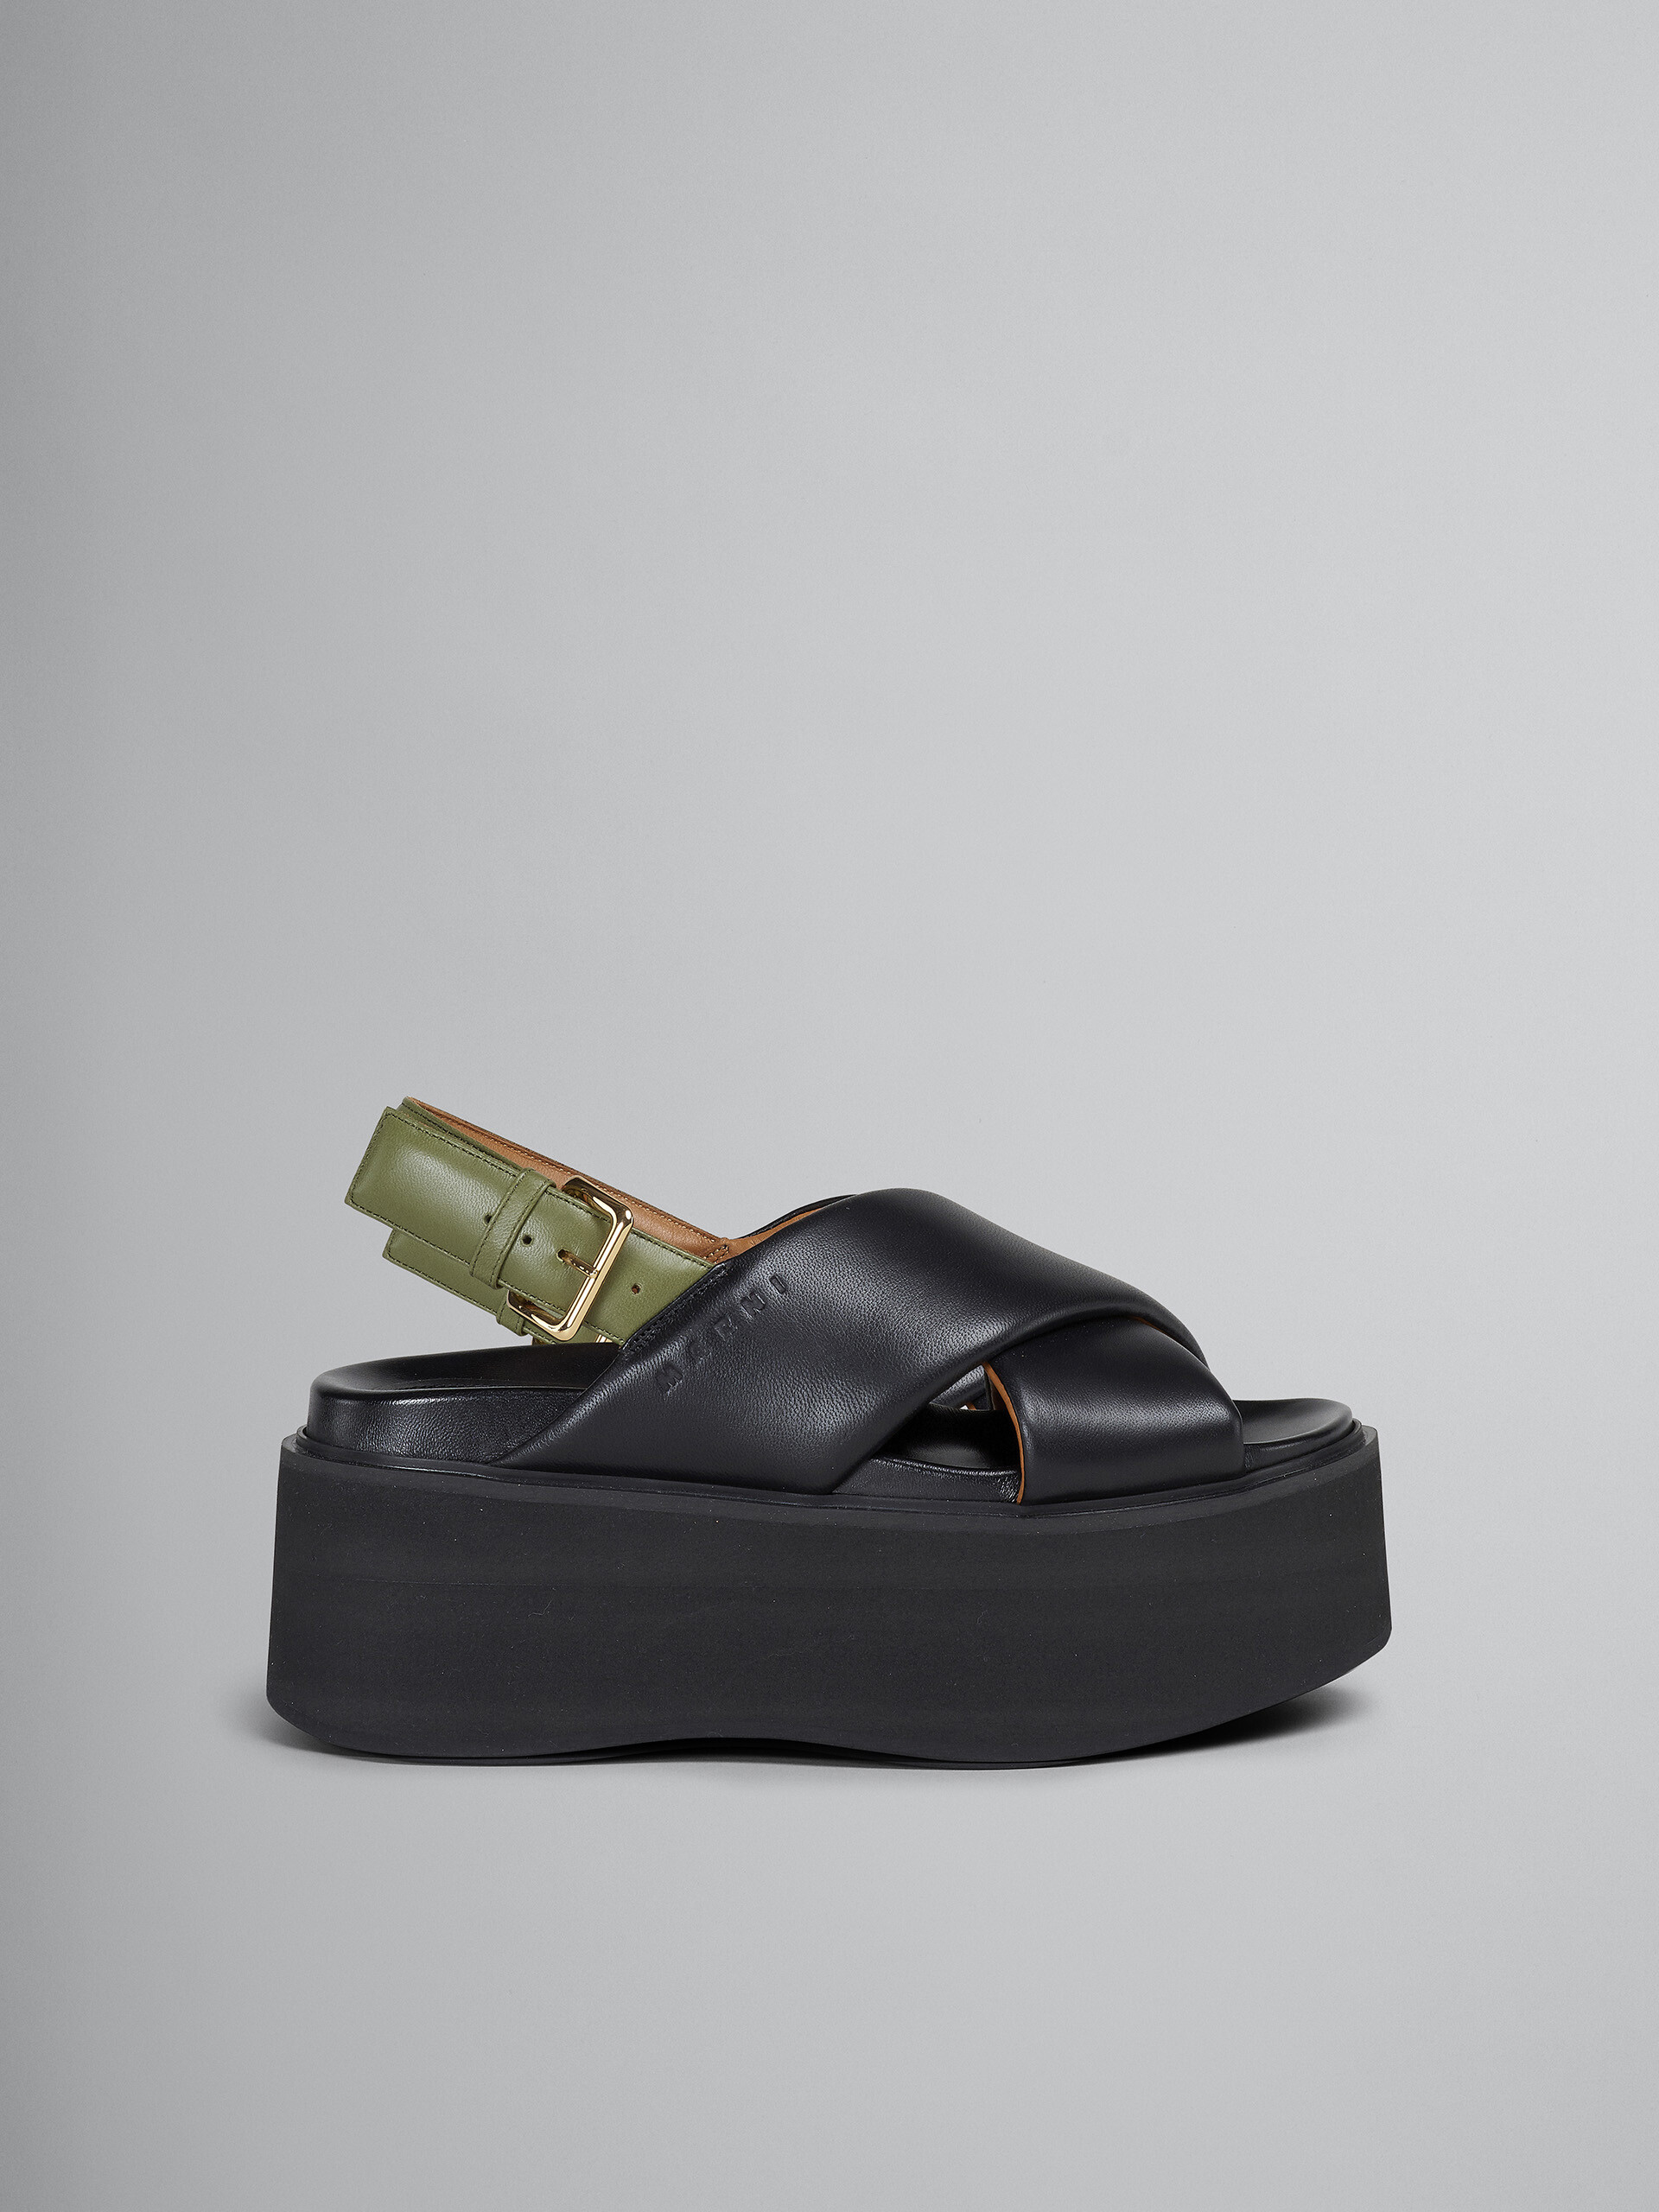 Black and green leather wedge - Sandals - Image 1